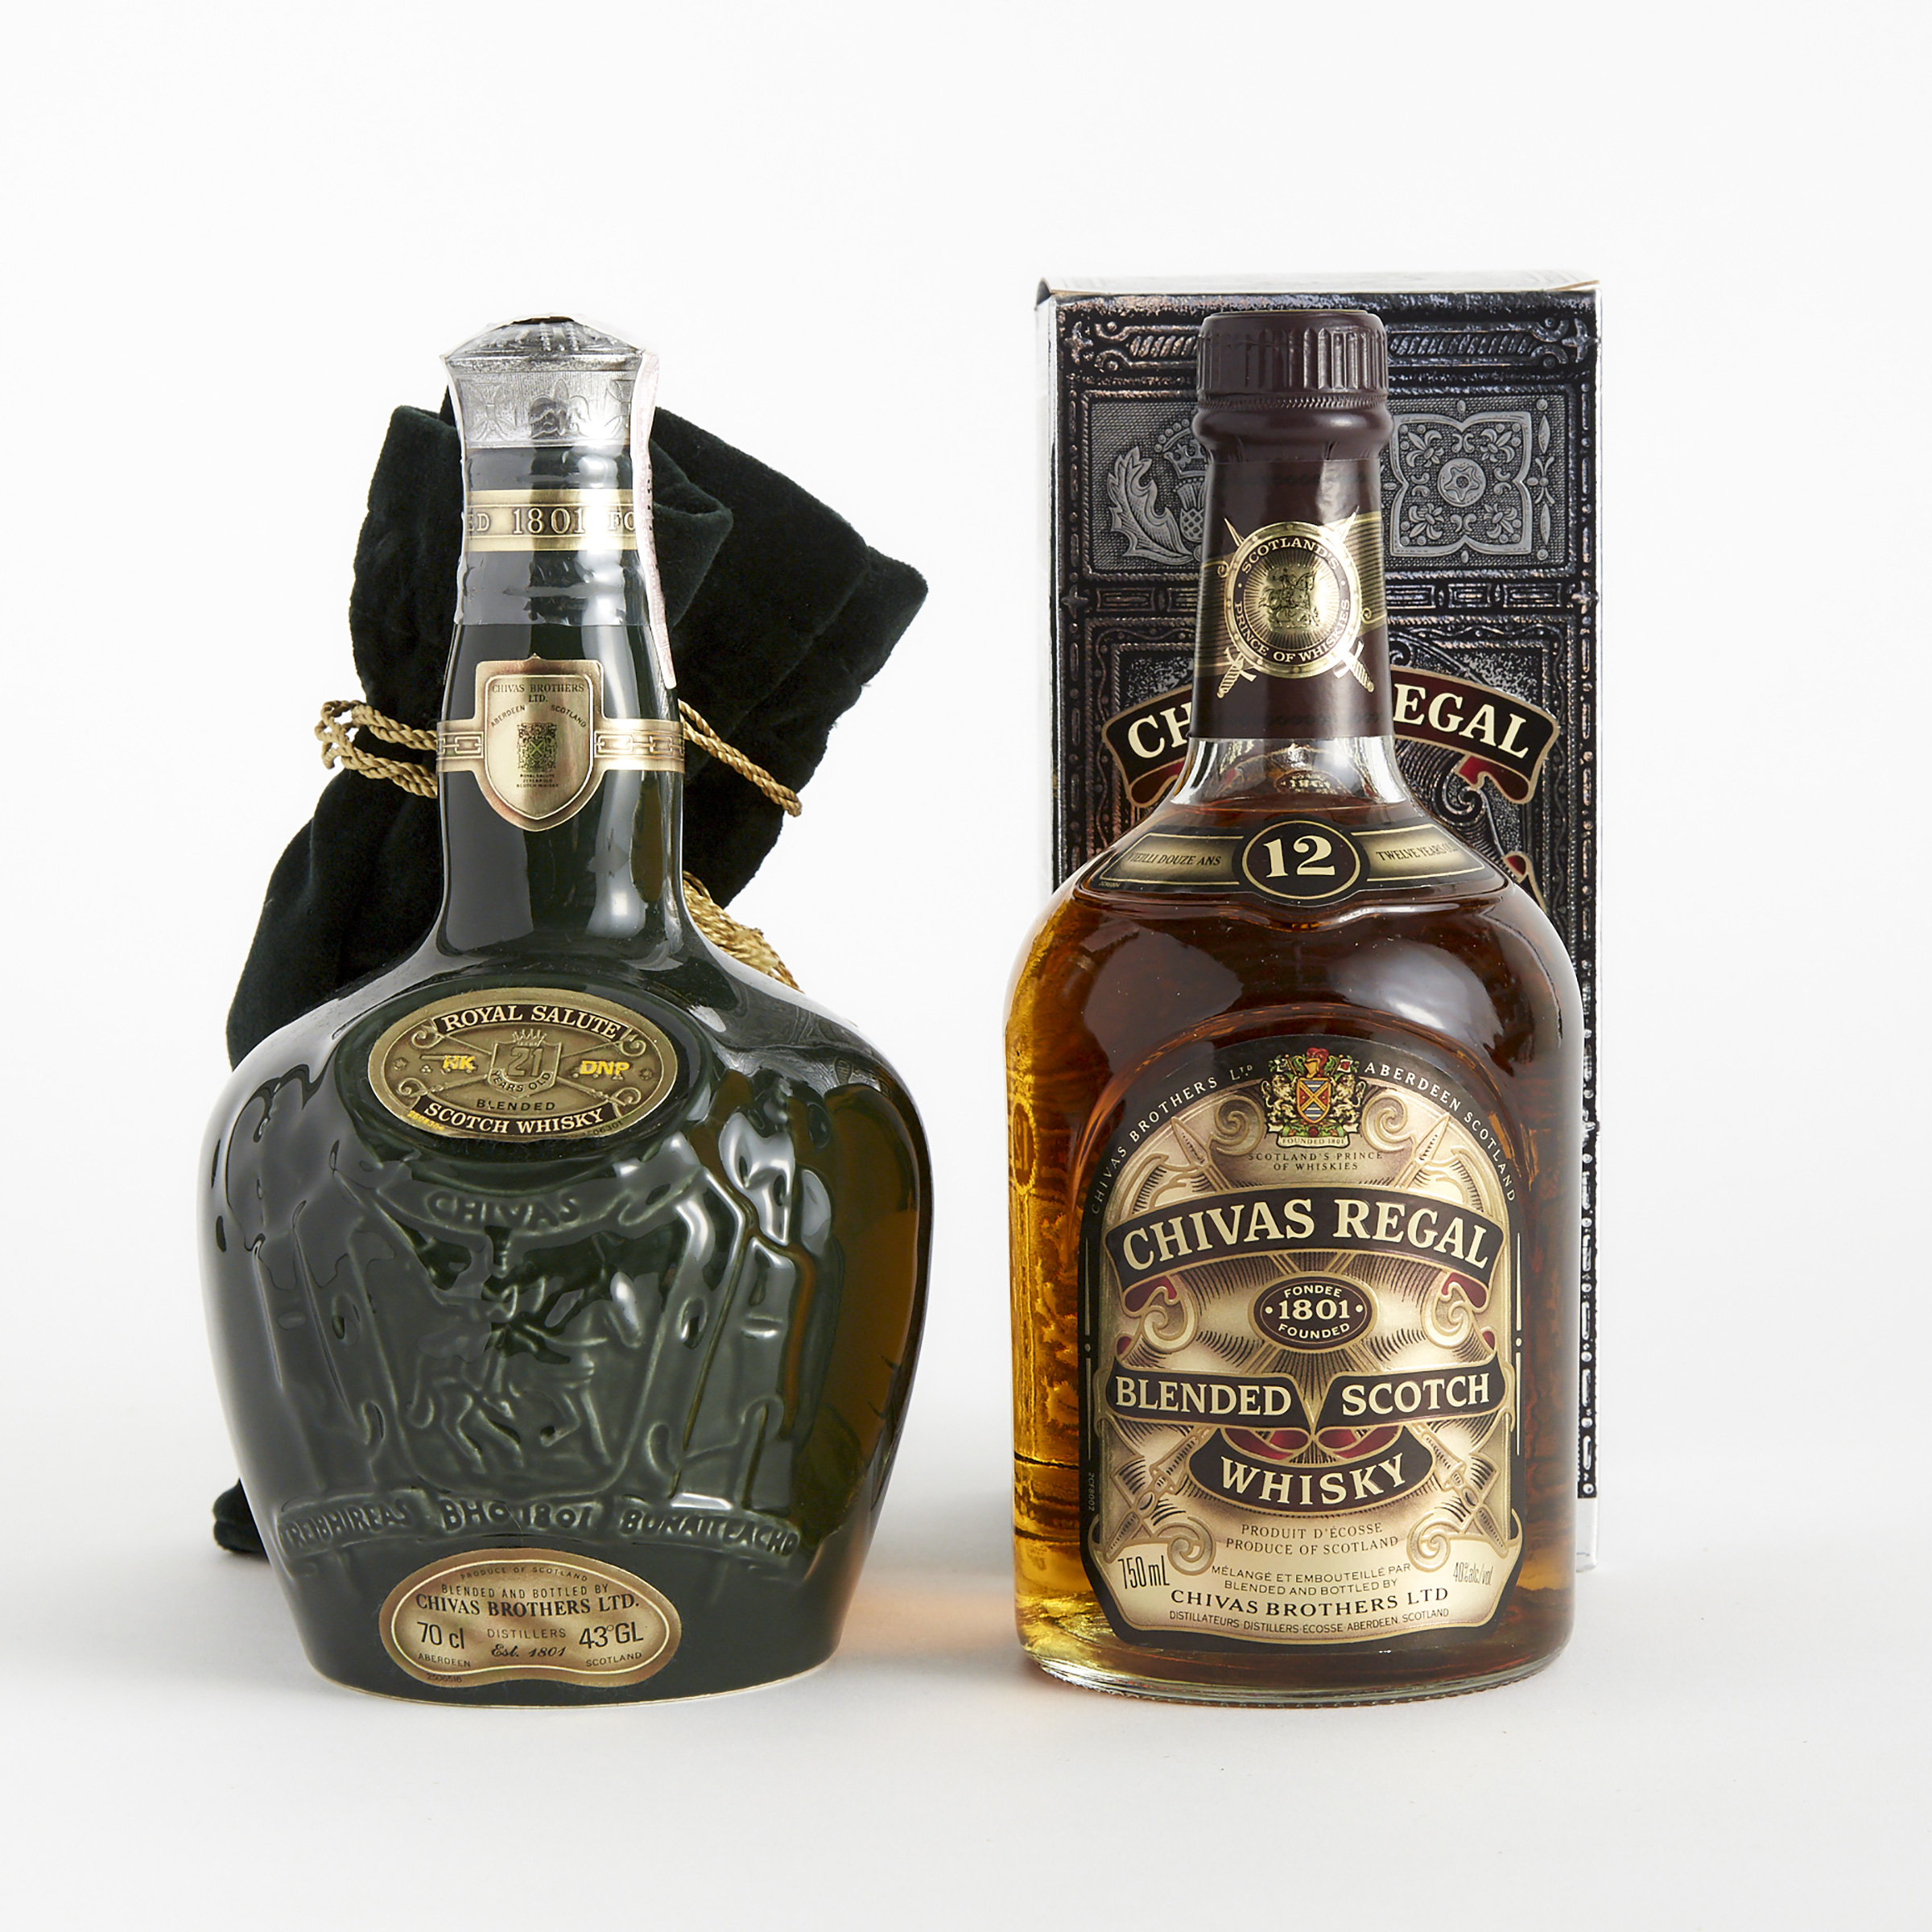 CHIVAS REGAL BLENDED SCOTCH WHISKY 12 YEARS (ONE 750 ML)
ROYAL SALUTE BLENDED SCOTCH WHISKY 21 YEARS (ONE 70 CL)